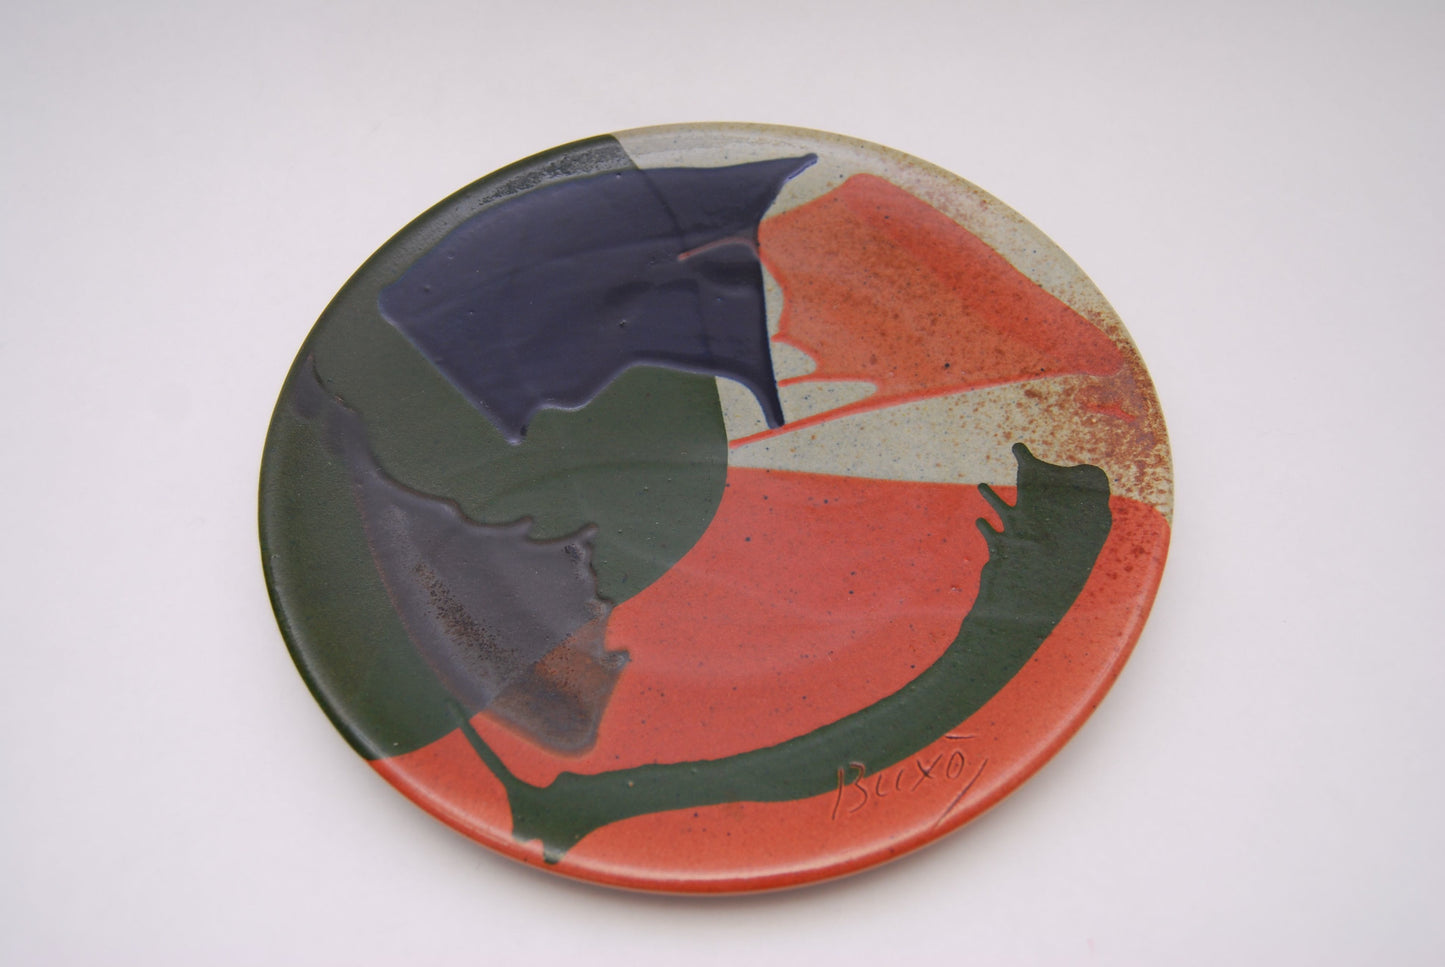 Decorative wall plate by Buxo